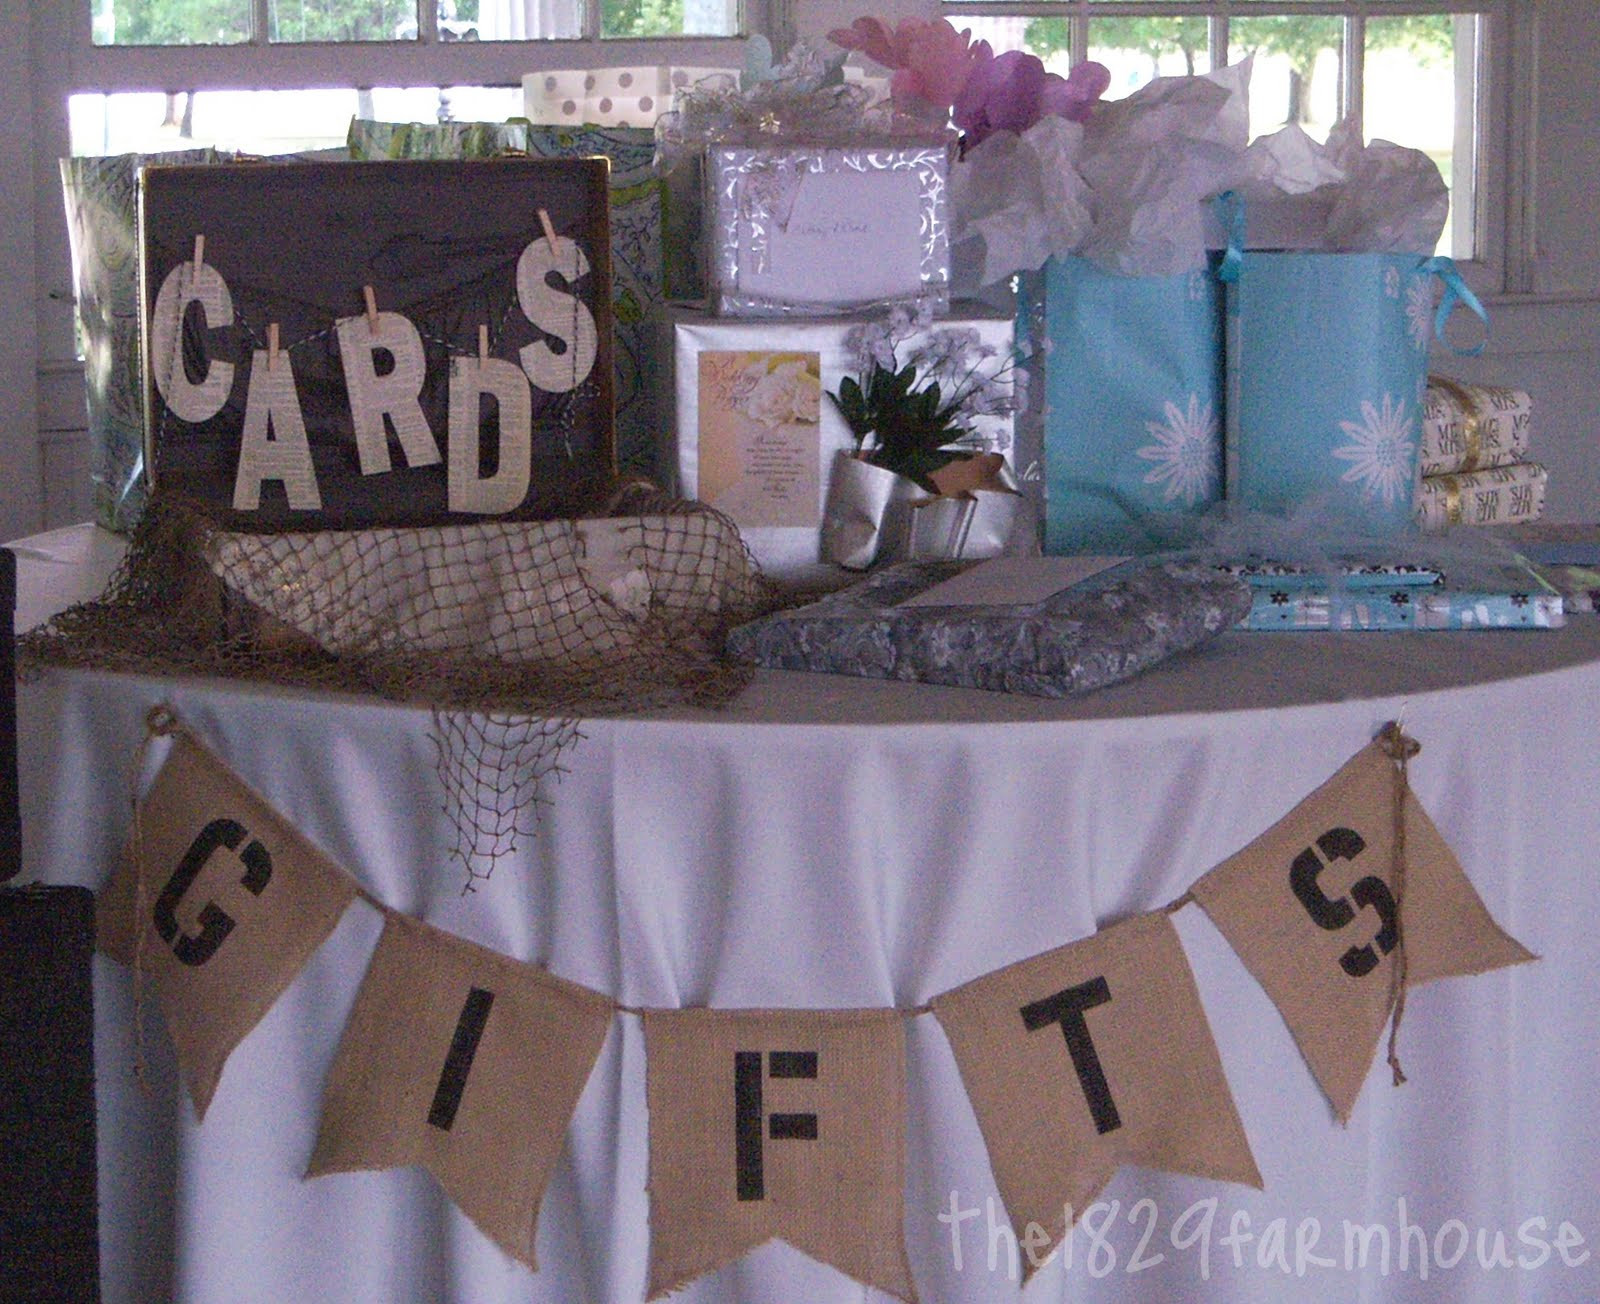 Decorating Ideas For Baby Shower Gift Table
 The 1829 Farmhouse just married decor